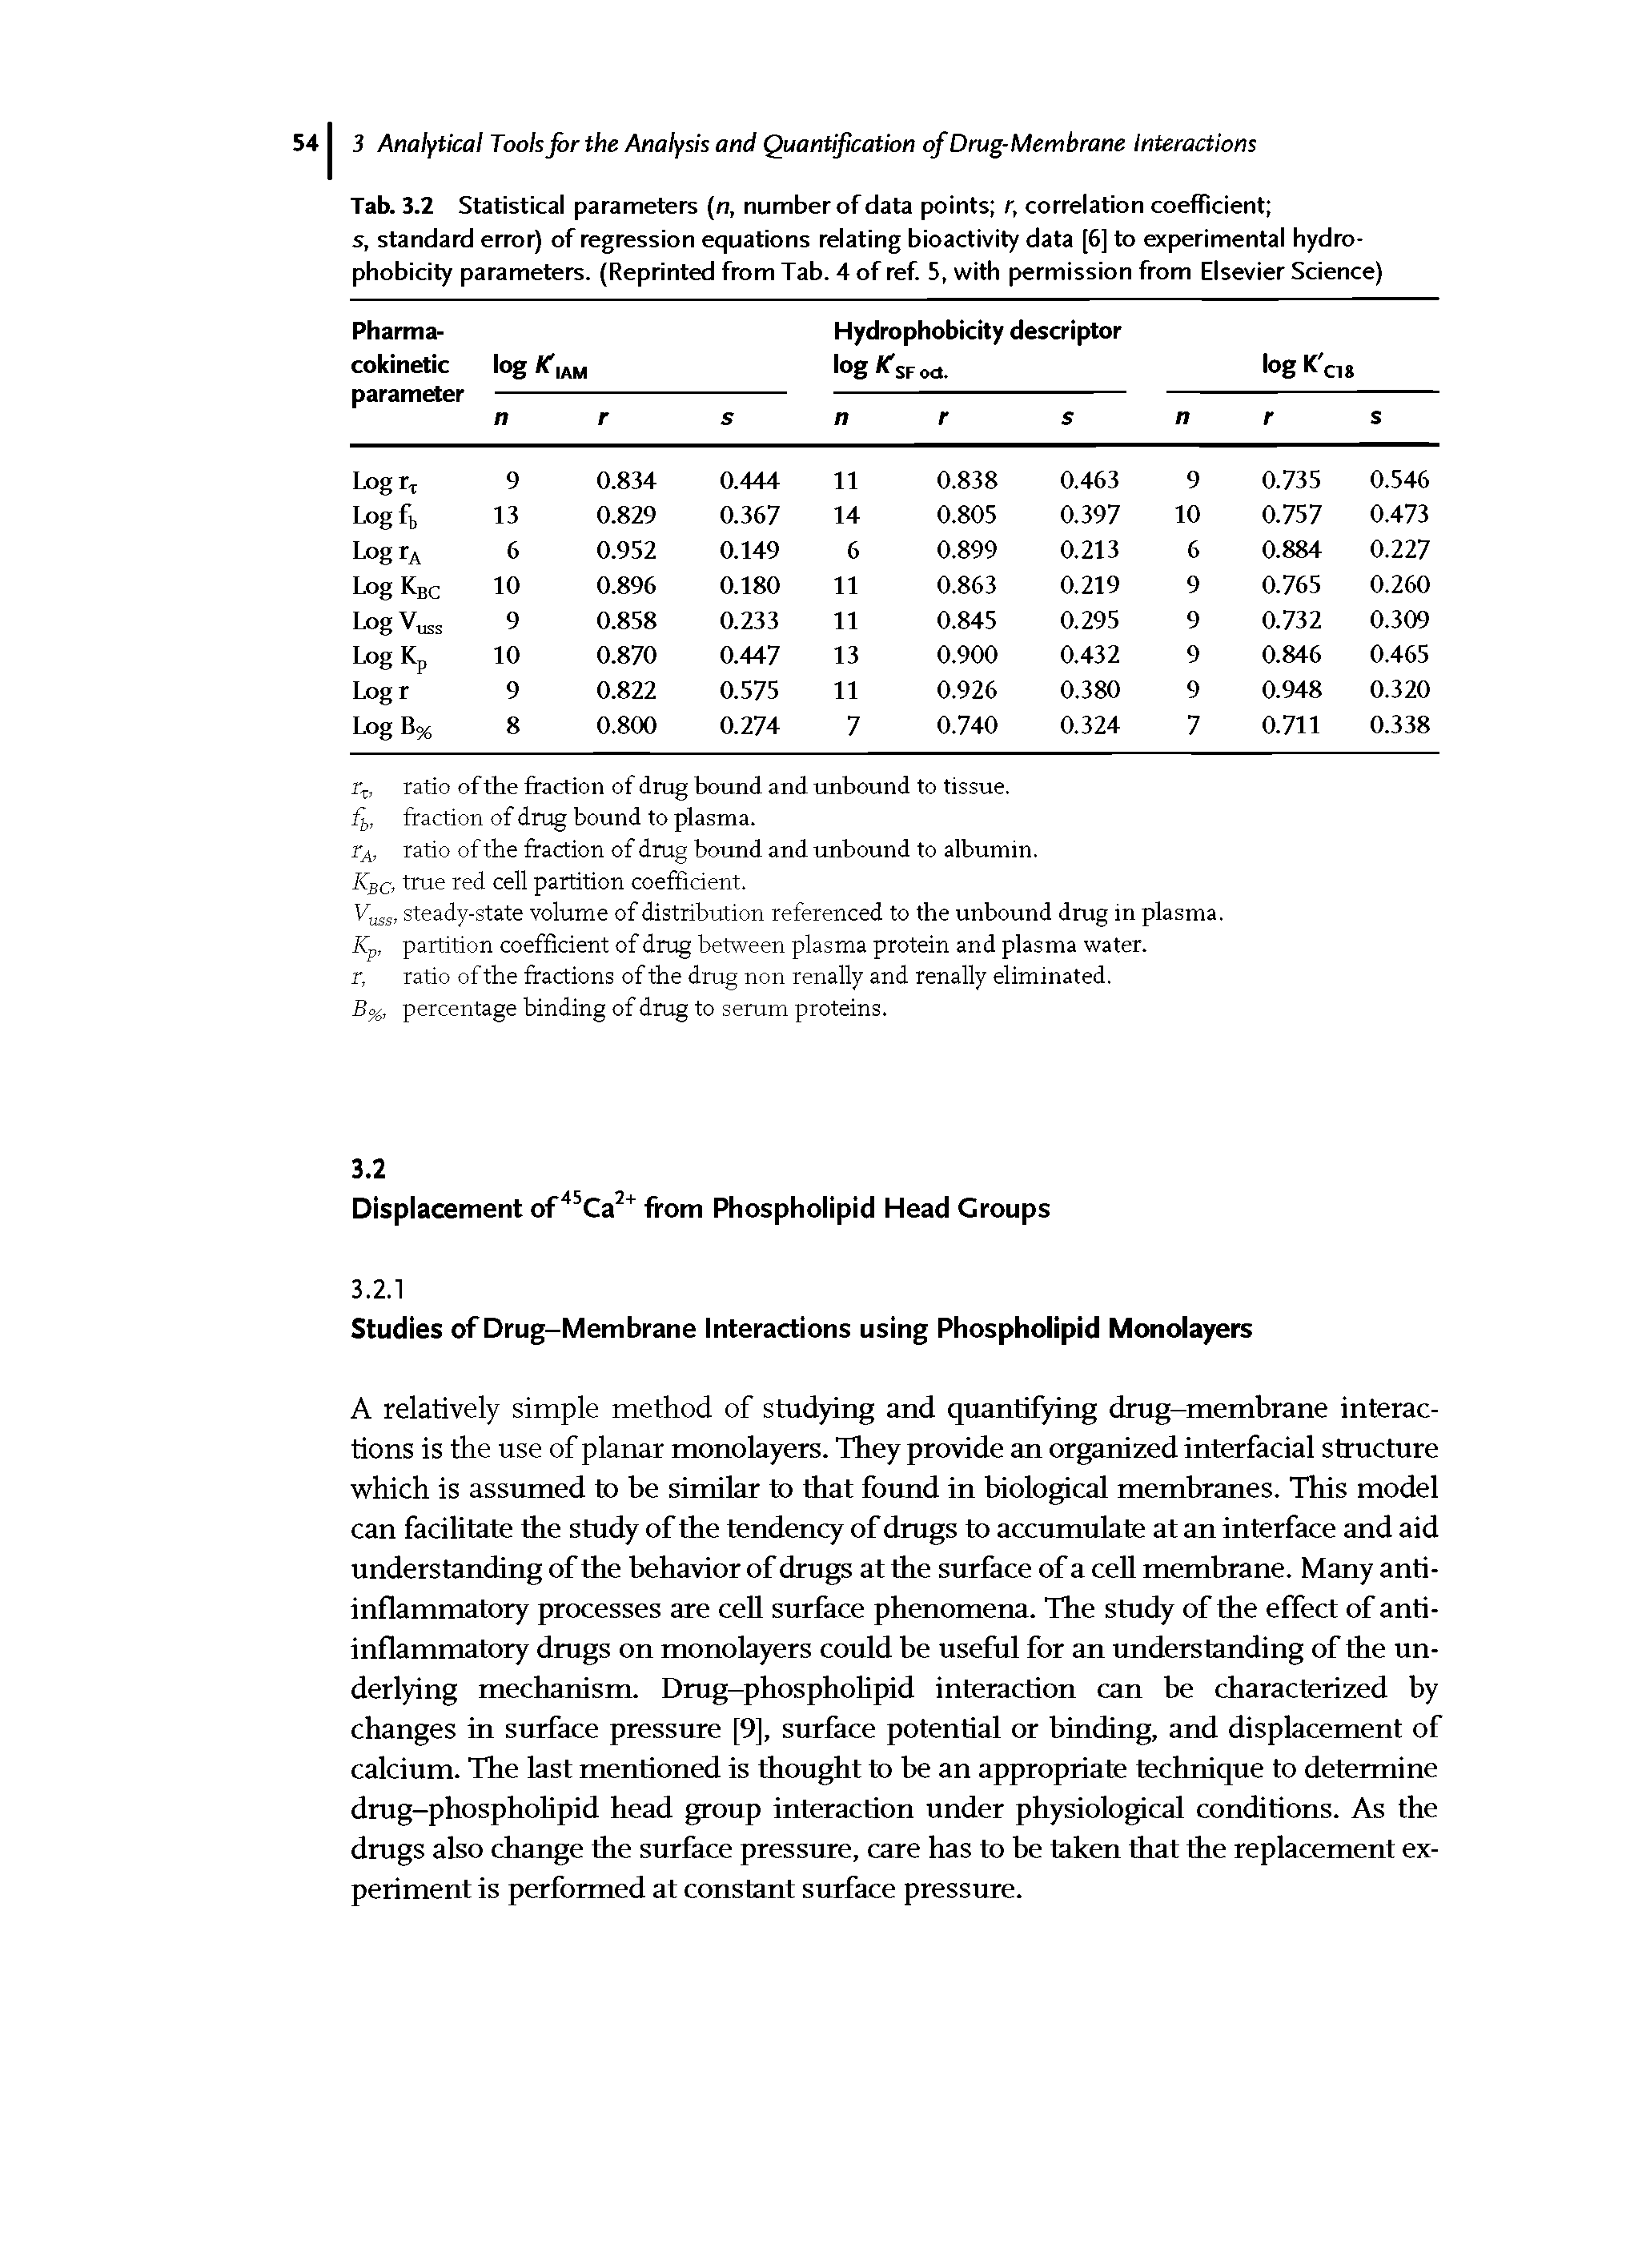 Tab. 3.2 Statistical parameters (n, number of data points r, correlation coefficient s, standard error) of regression equations relating bioactivity data [6] to experimental hydro-phobicity parameters. (Reprinted from Tab. 4 of ref. 5, with permission from Elsevier Science)...